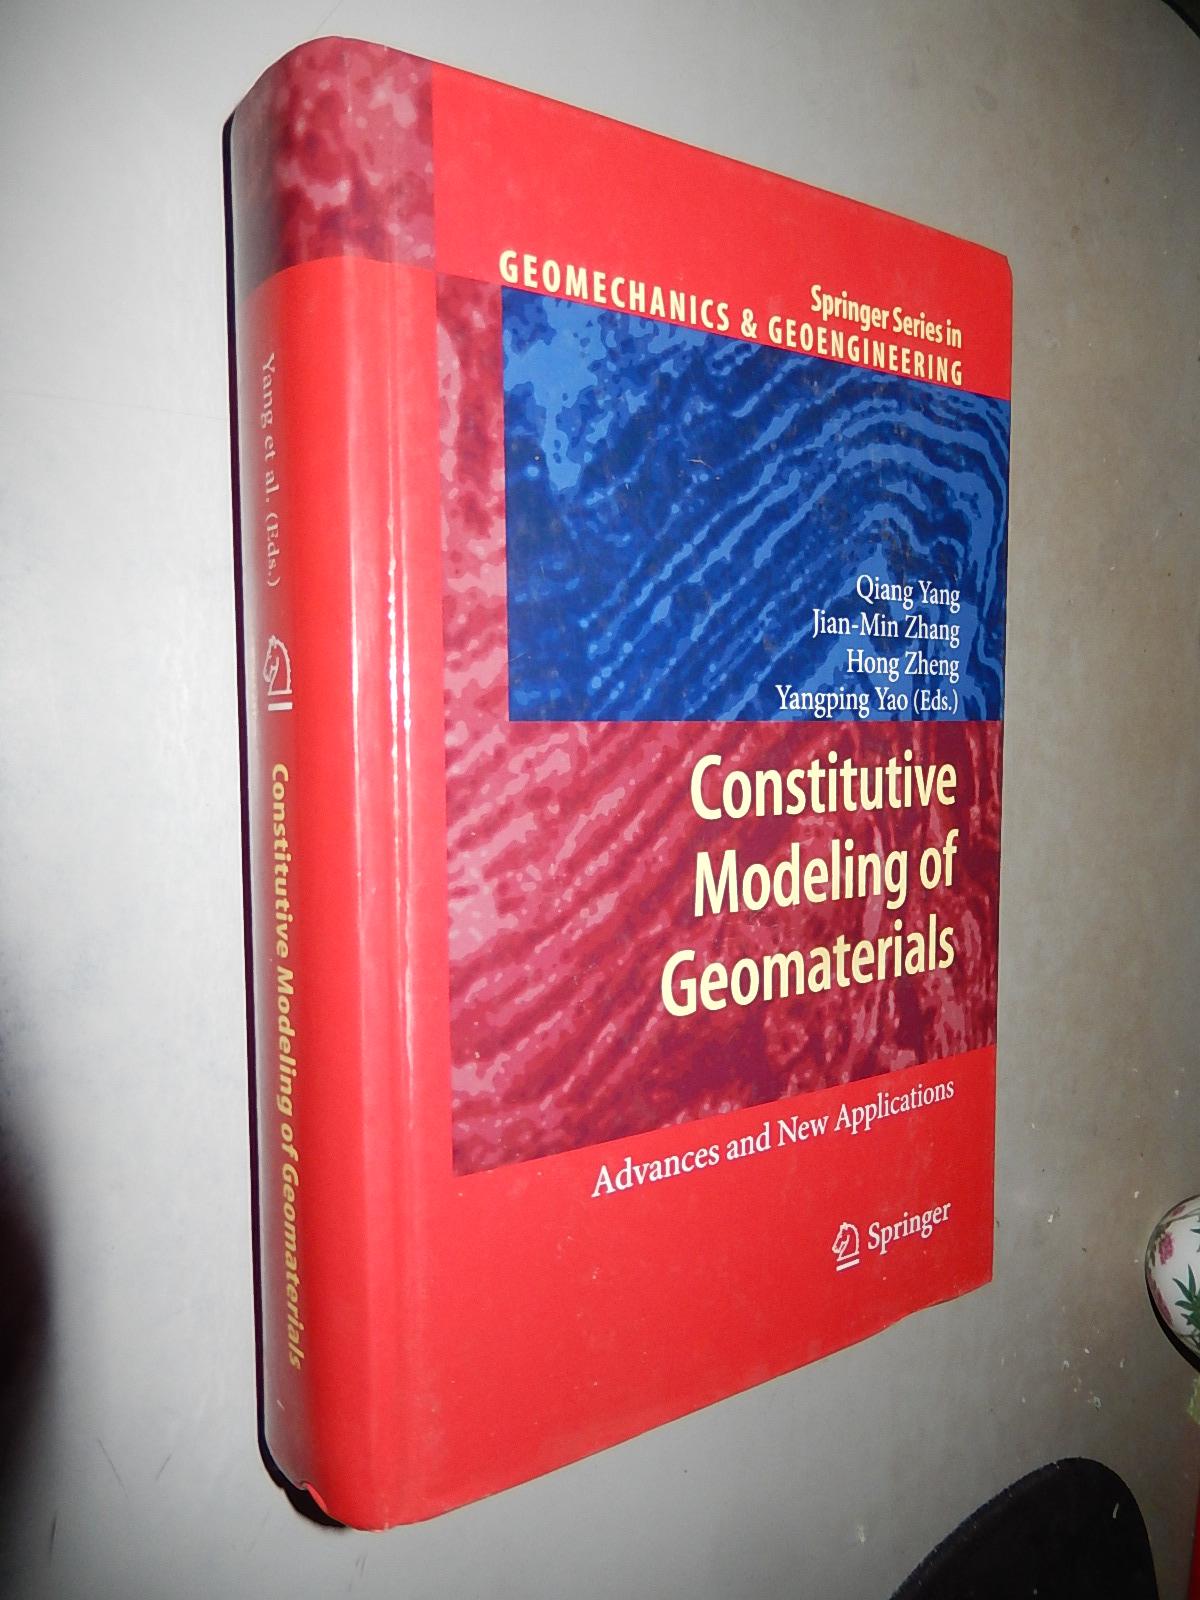 Constitutive Modeling of Geomaterials: Advances and New Applications （Springer Series in Geomechanics and Geoengineering） 岩土本构模型 英文原版精装 现货